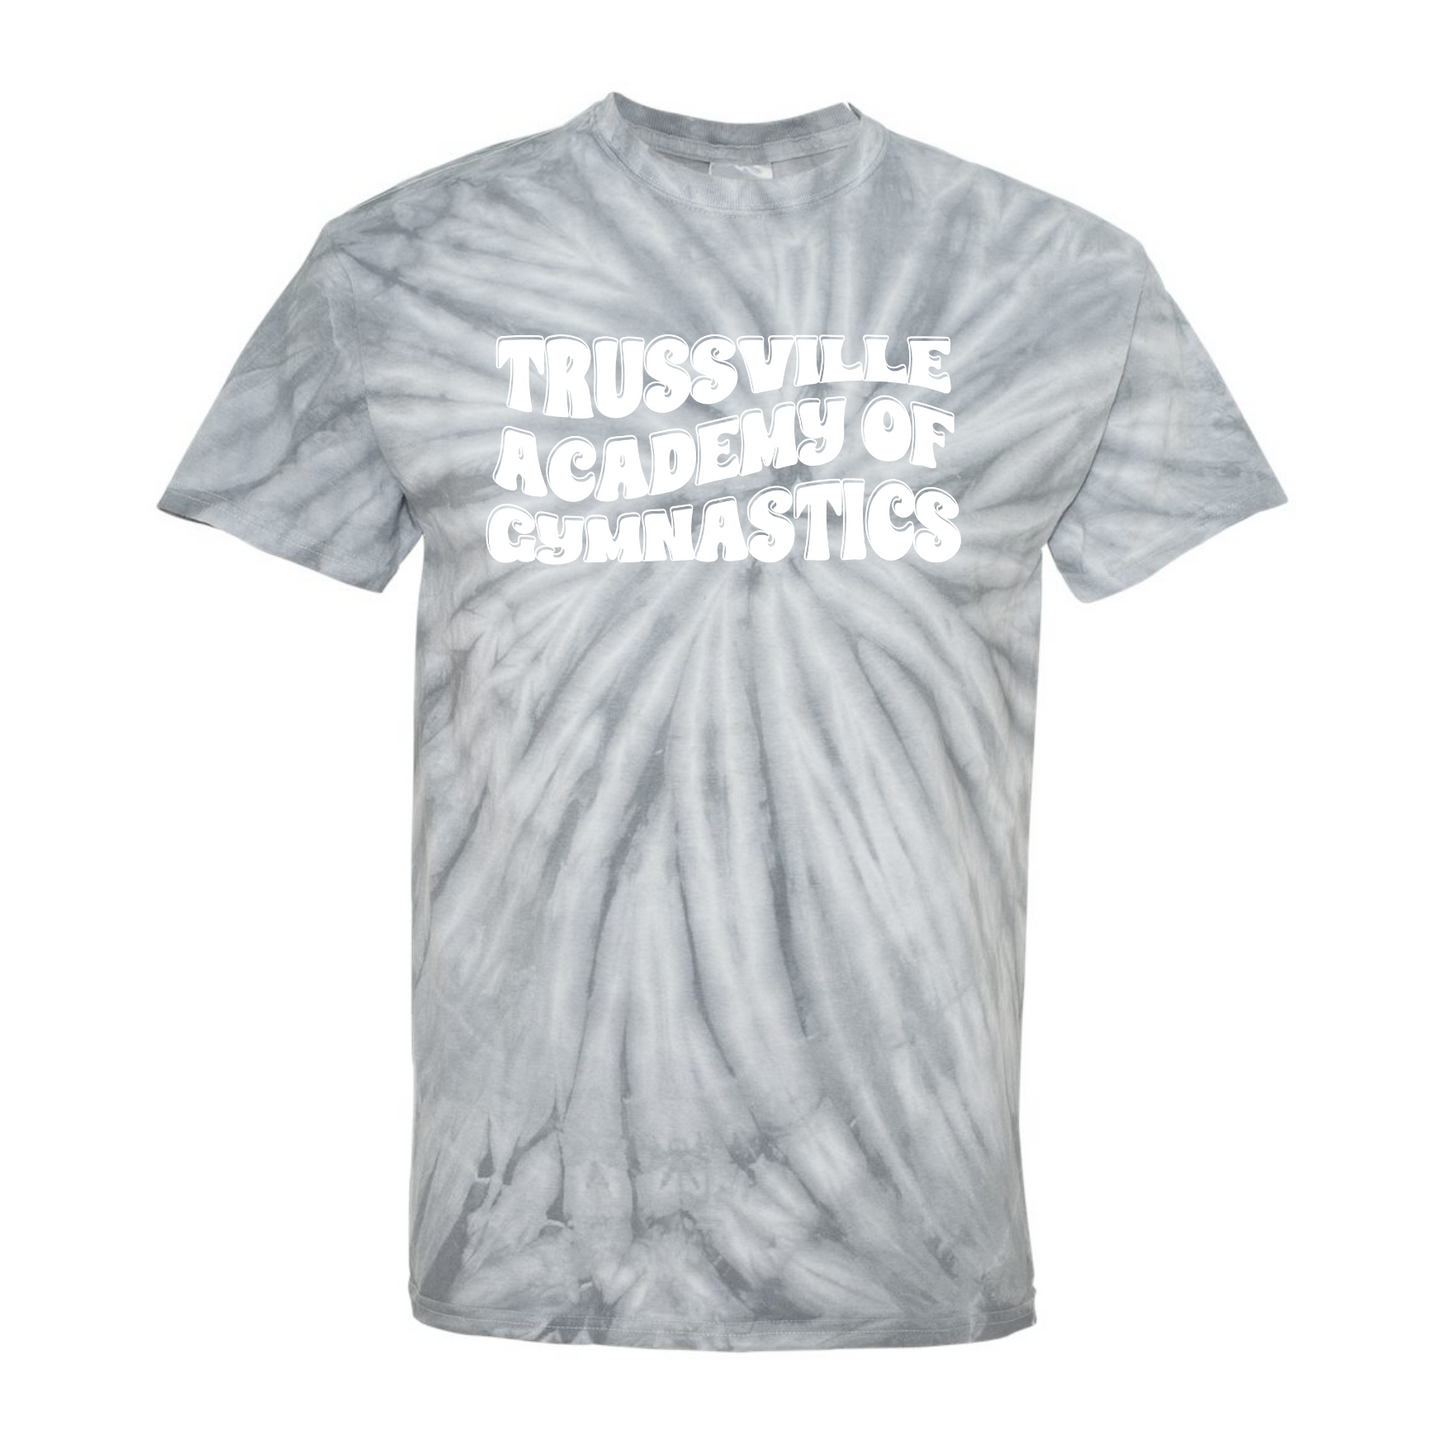 Groovy Trussville Academy of Gymnastics | Adult Tie Dye Tee-Sister Shirts-Sister Shirts, Cute & Custom Tees for Mama & Littles in Trussville, Alabama.